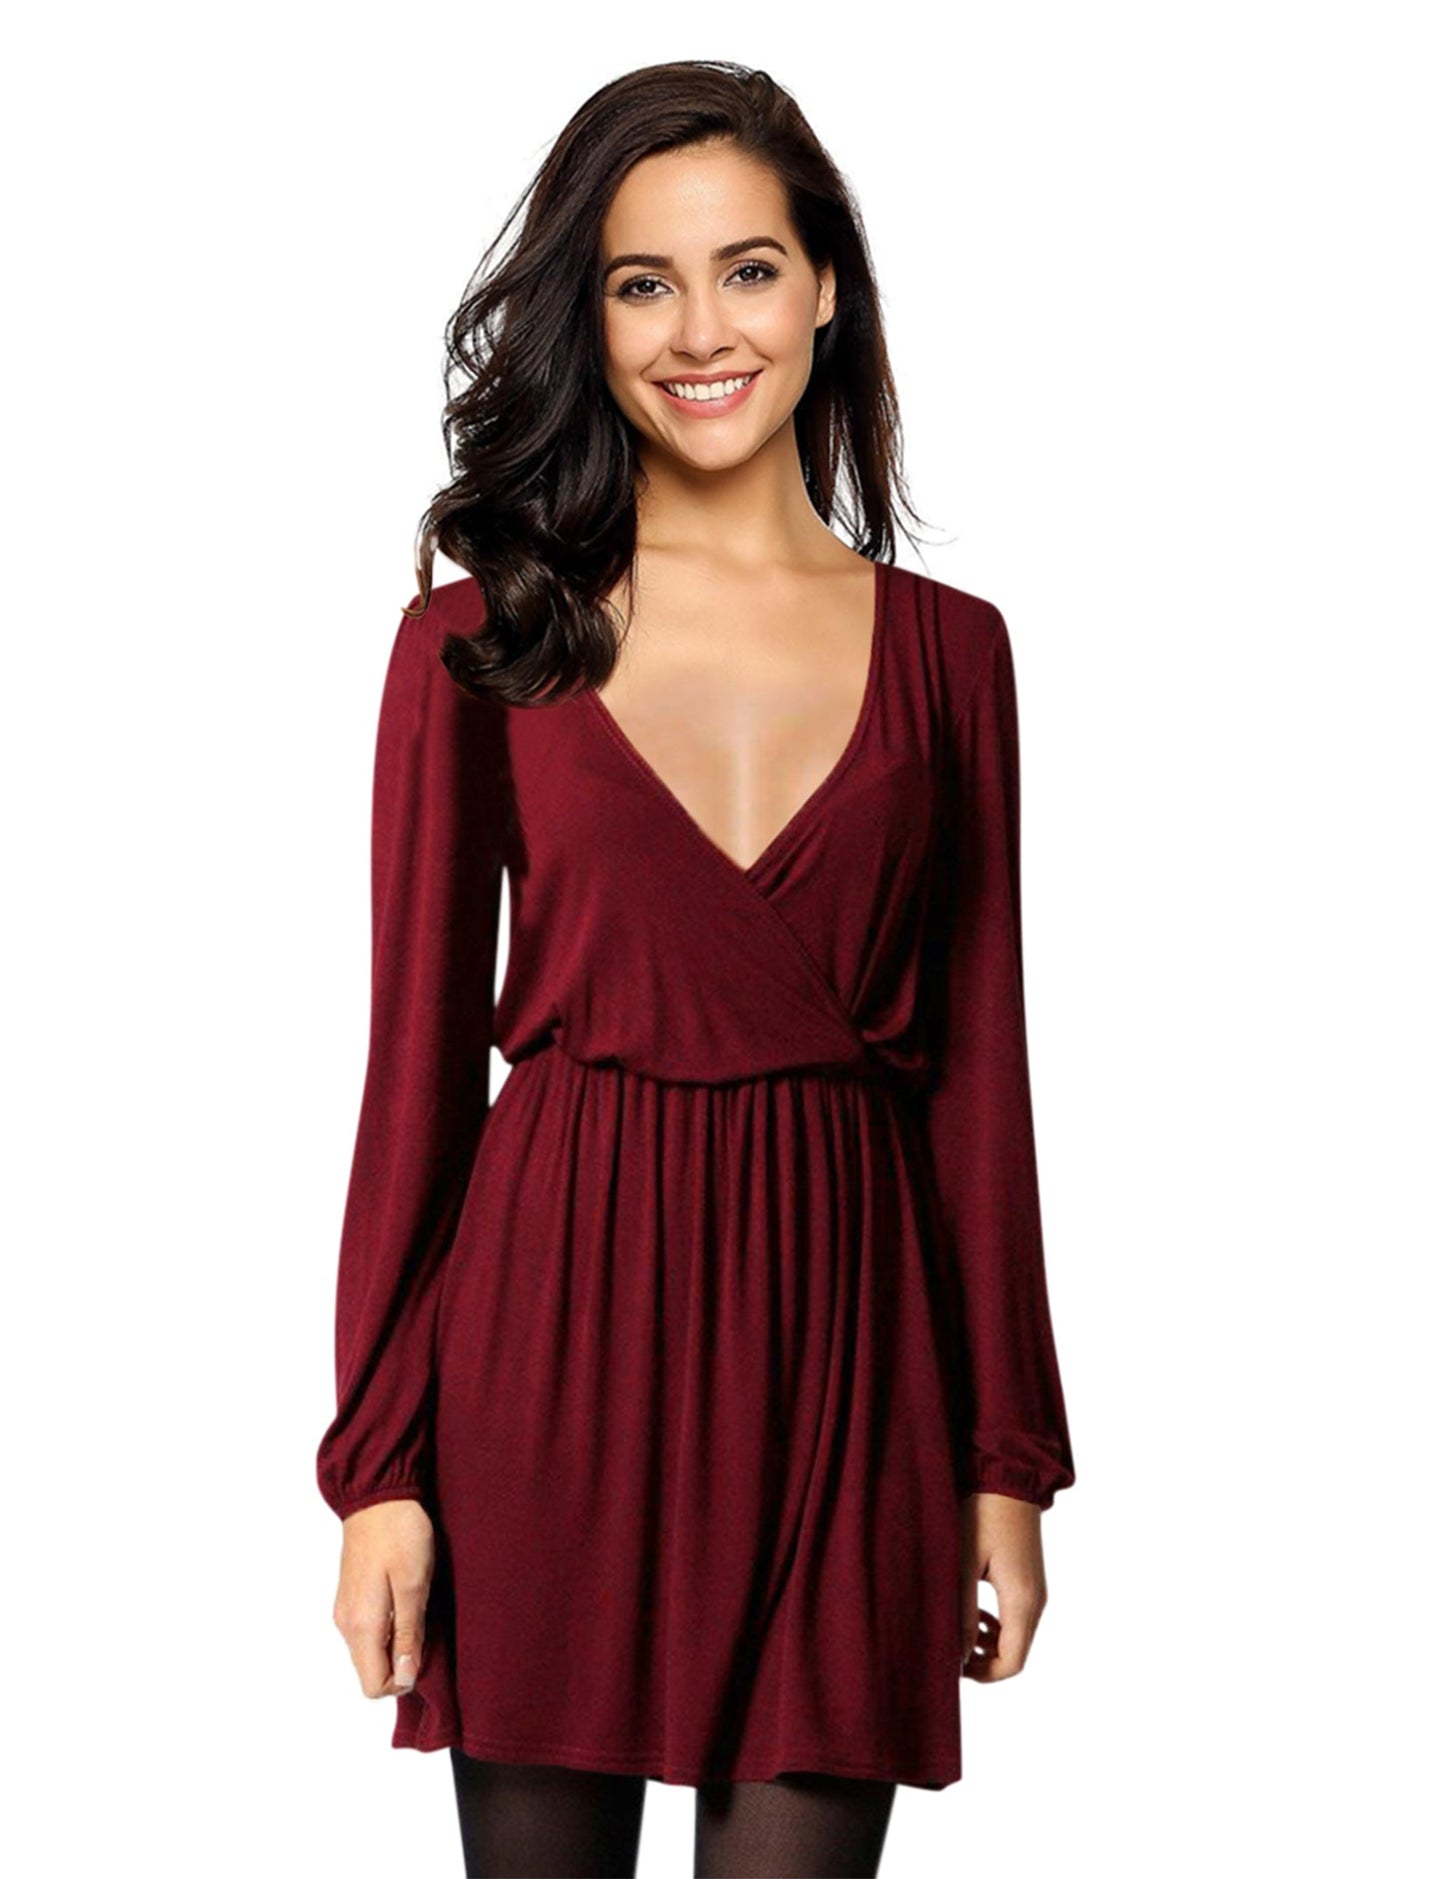 YESFASHION Women V-Neck A-Line Solid Plain Party Casual Mini Dress Wine Red